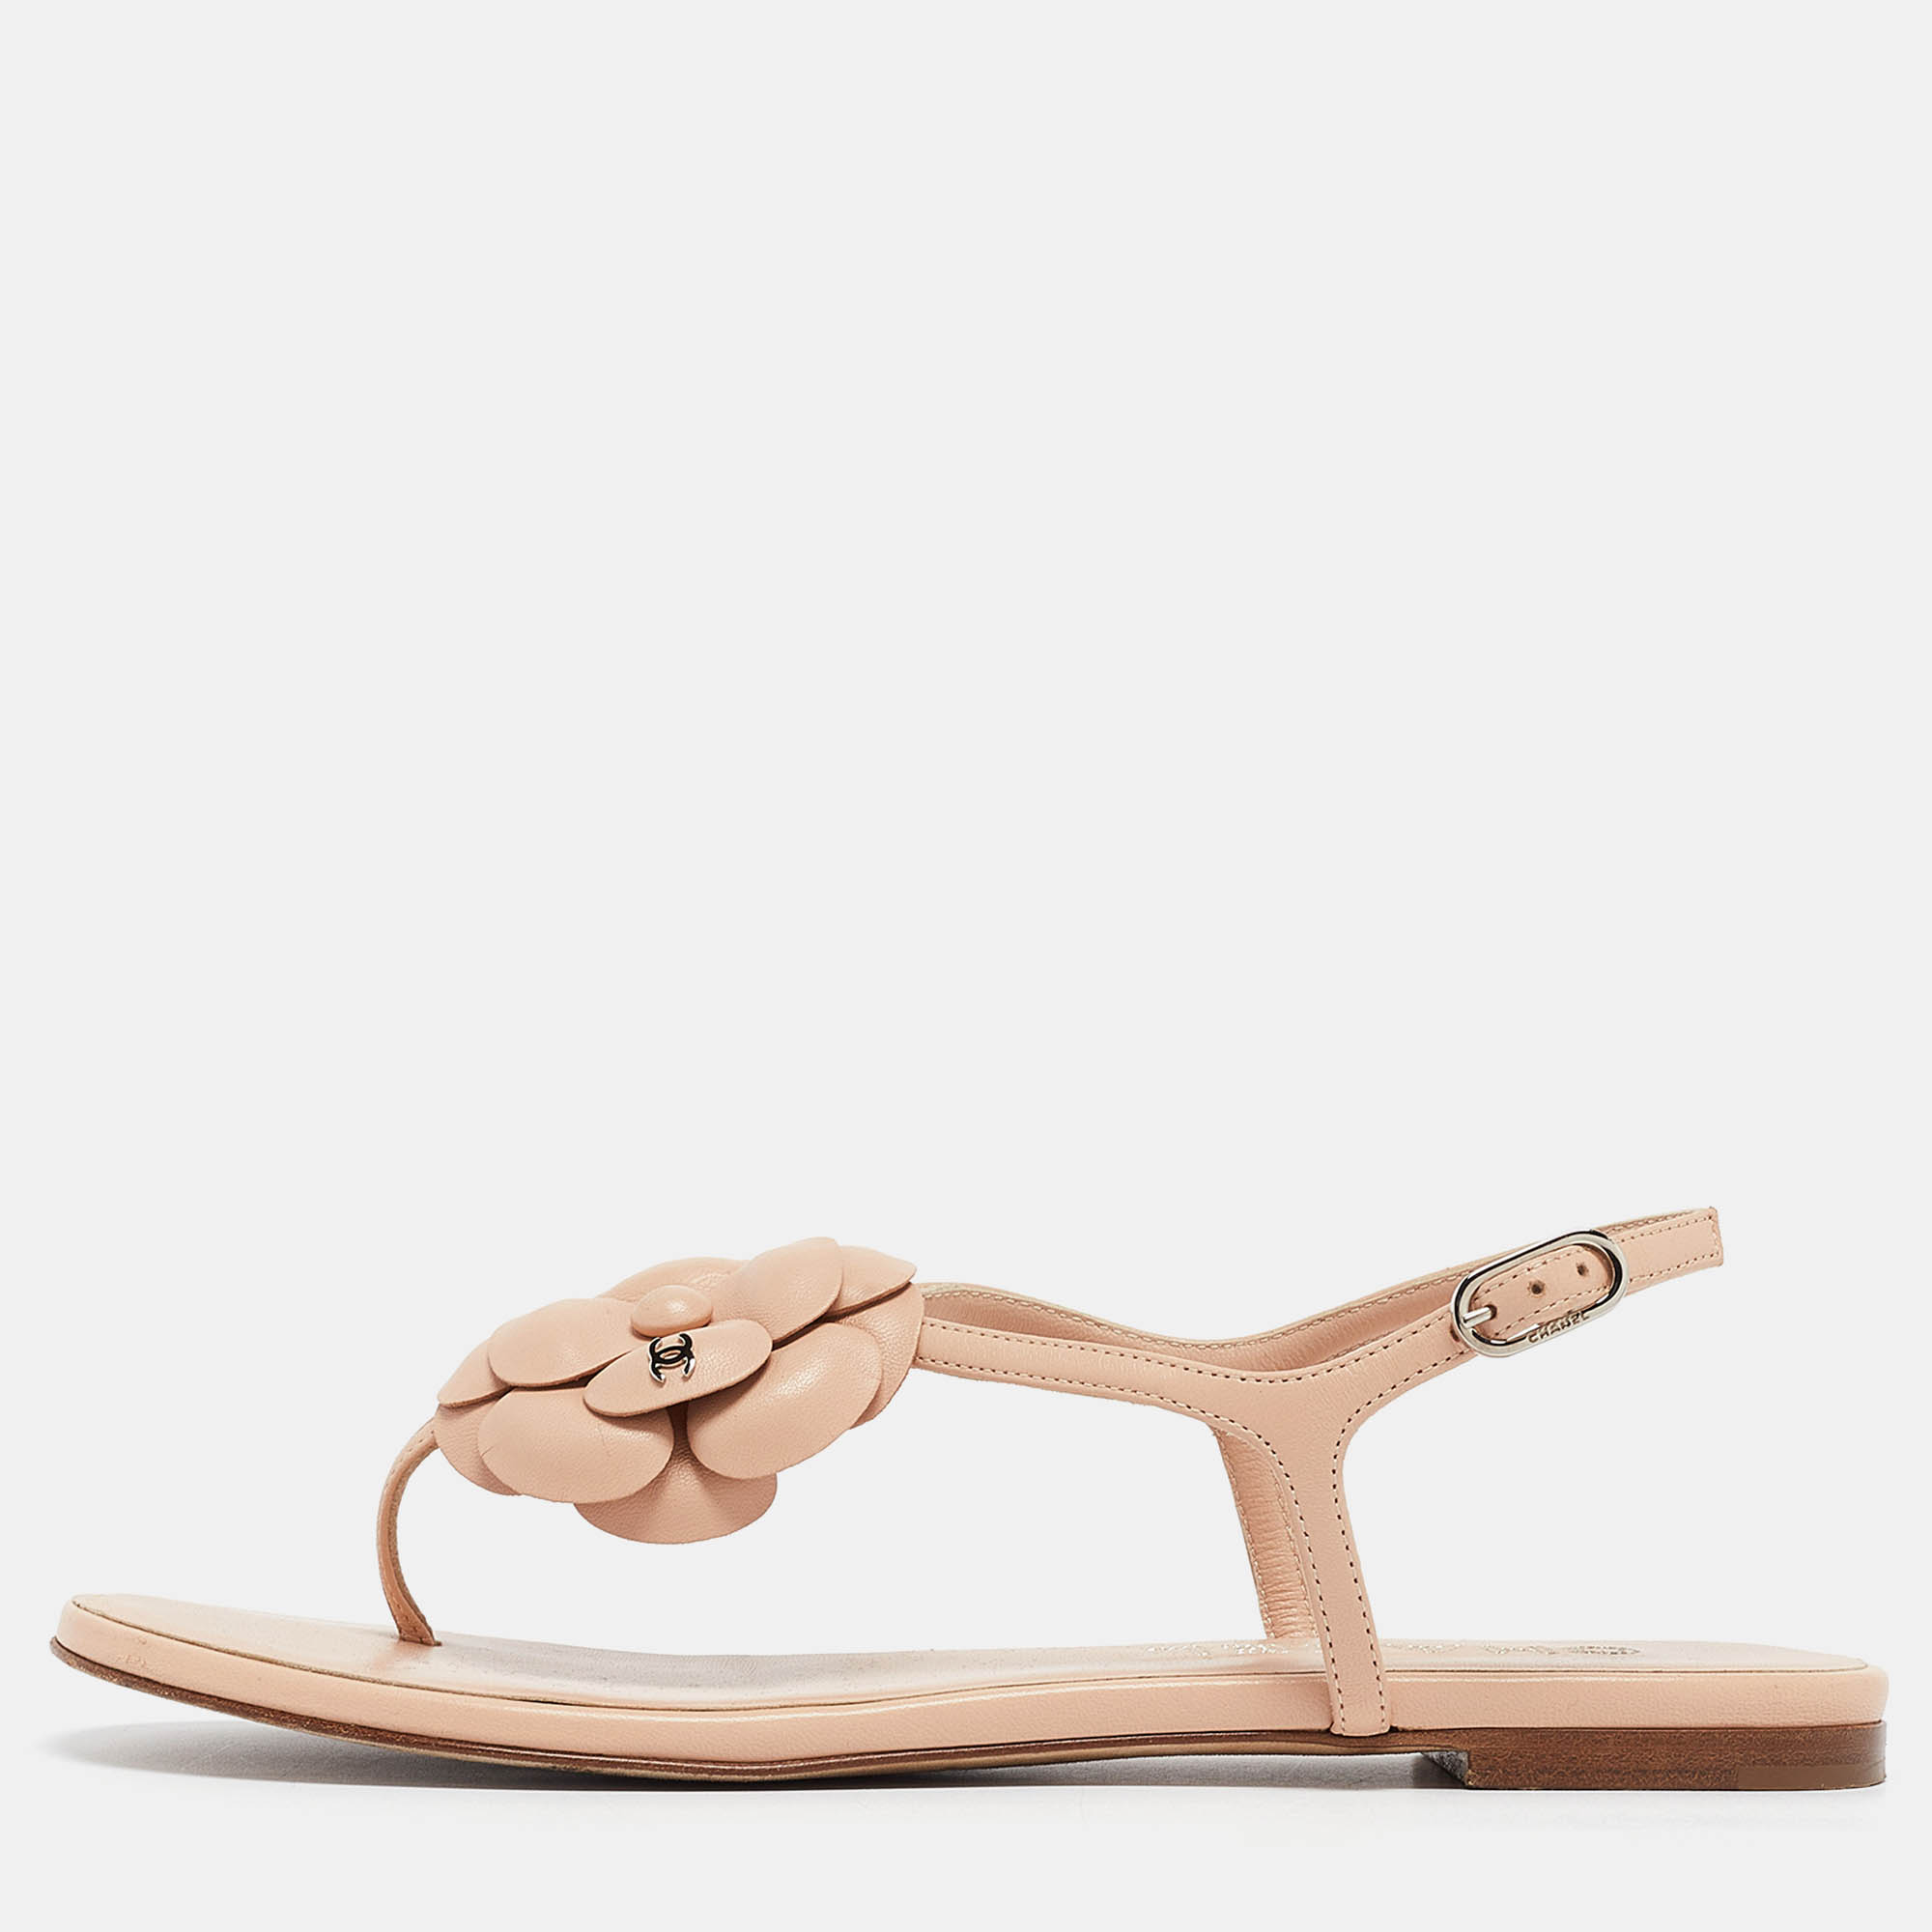 Chanel beige leather cc camellia thong ankle strap flat sandals size 39.5